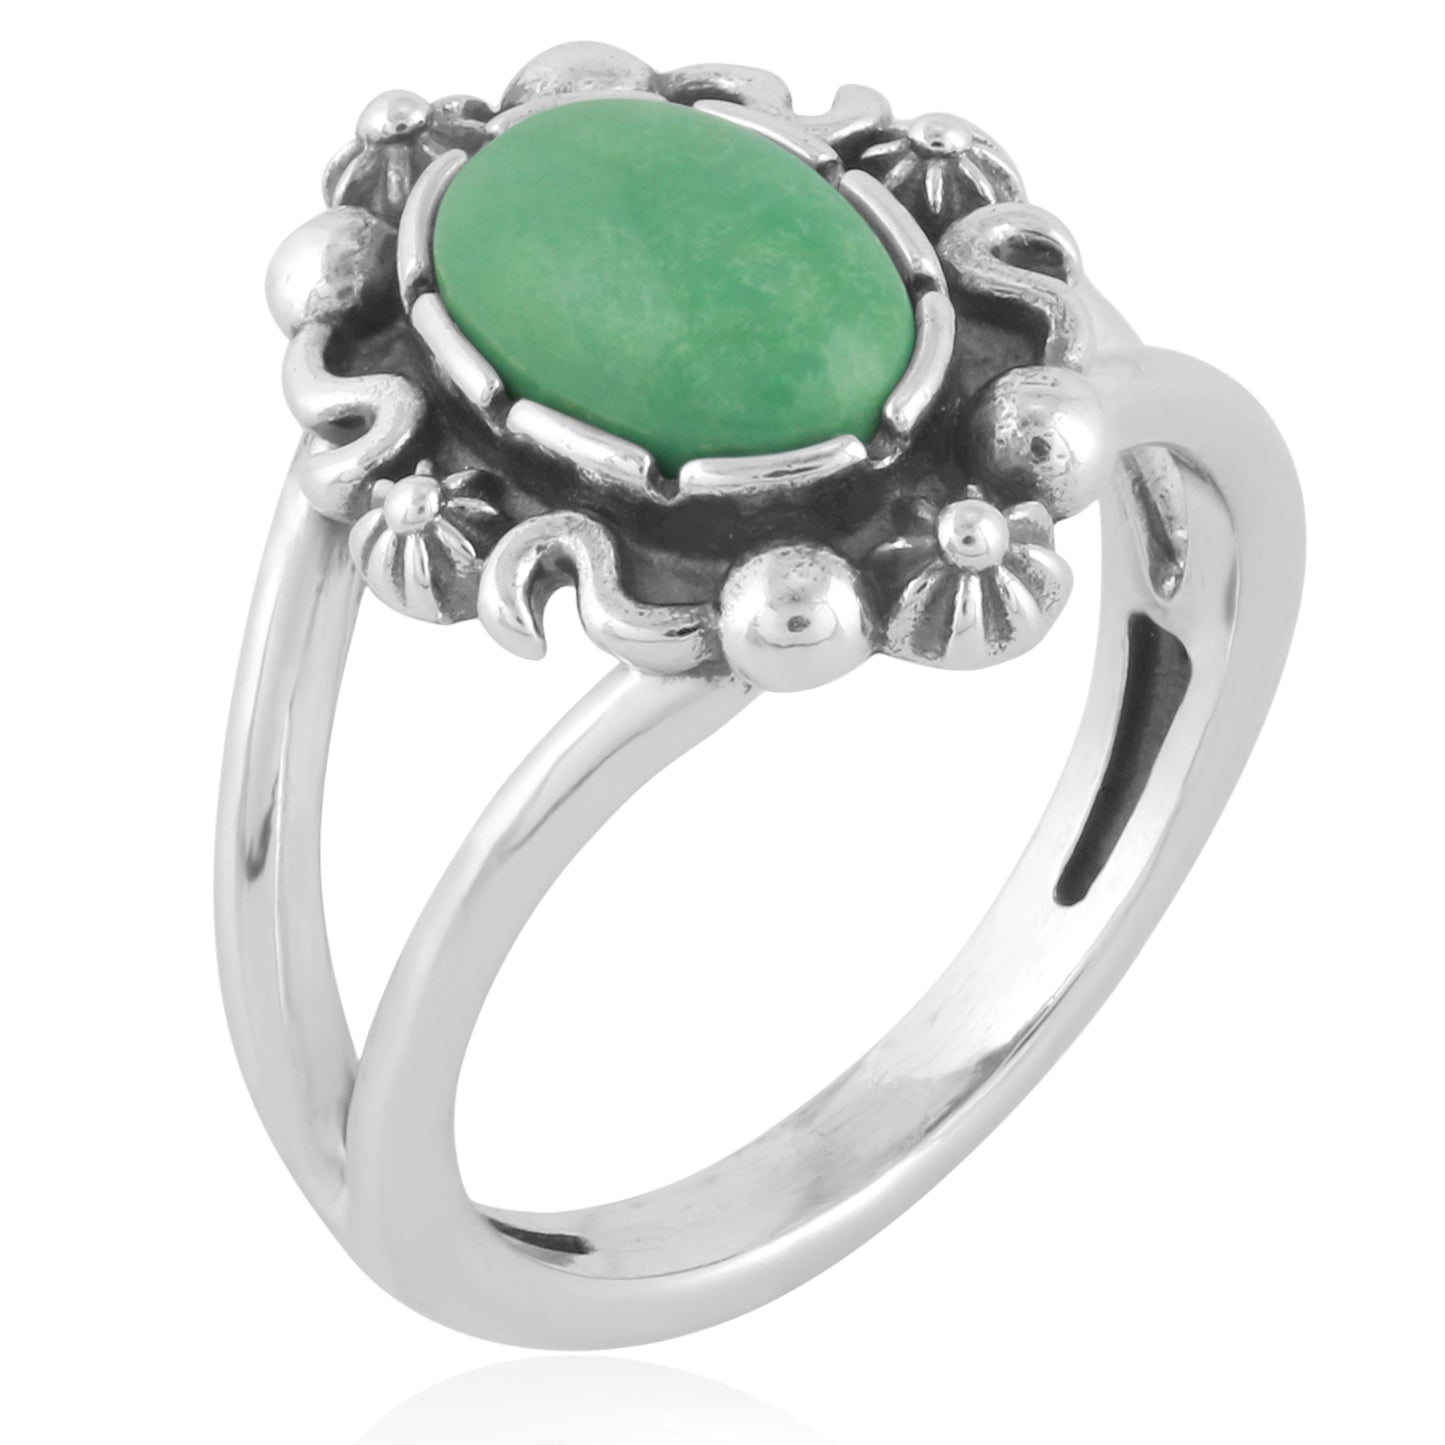 Sterling Silver Green Turquoise Gemstone Ring, Sizes 5 to 10